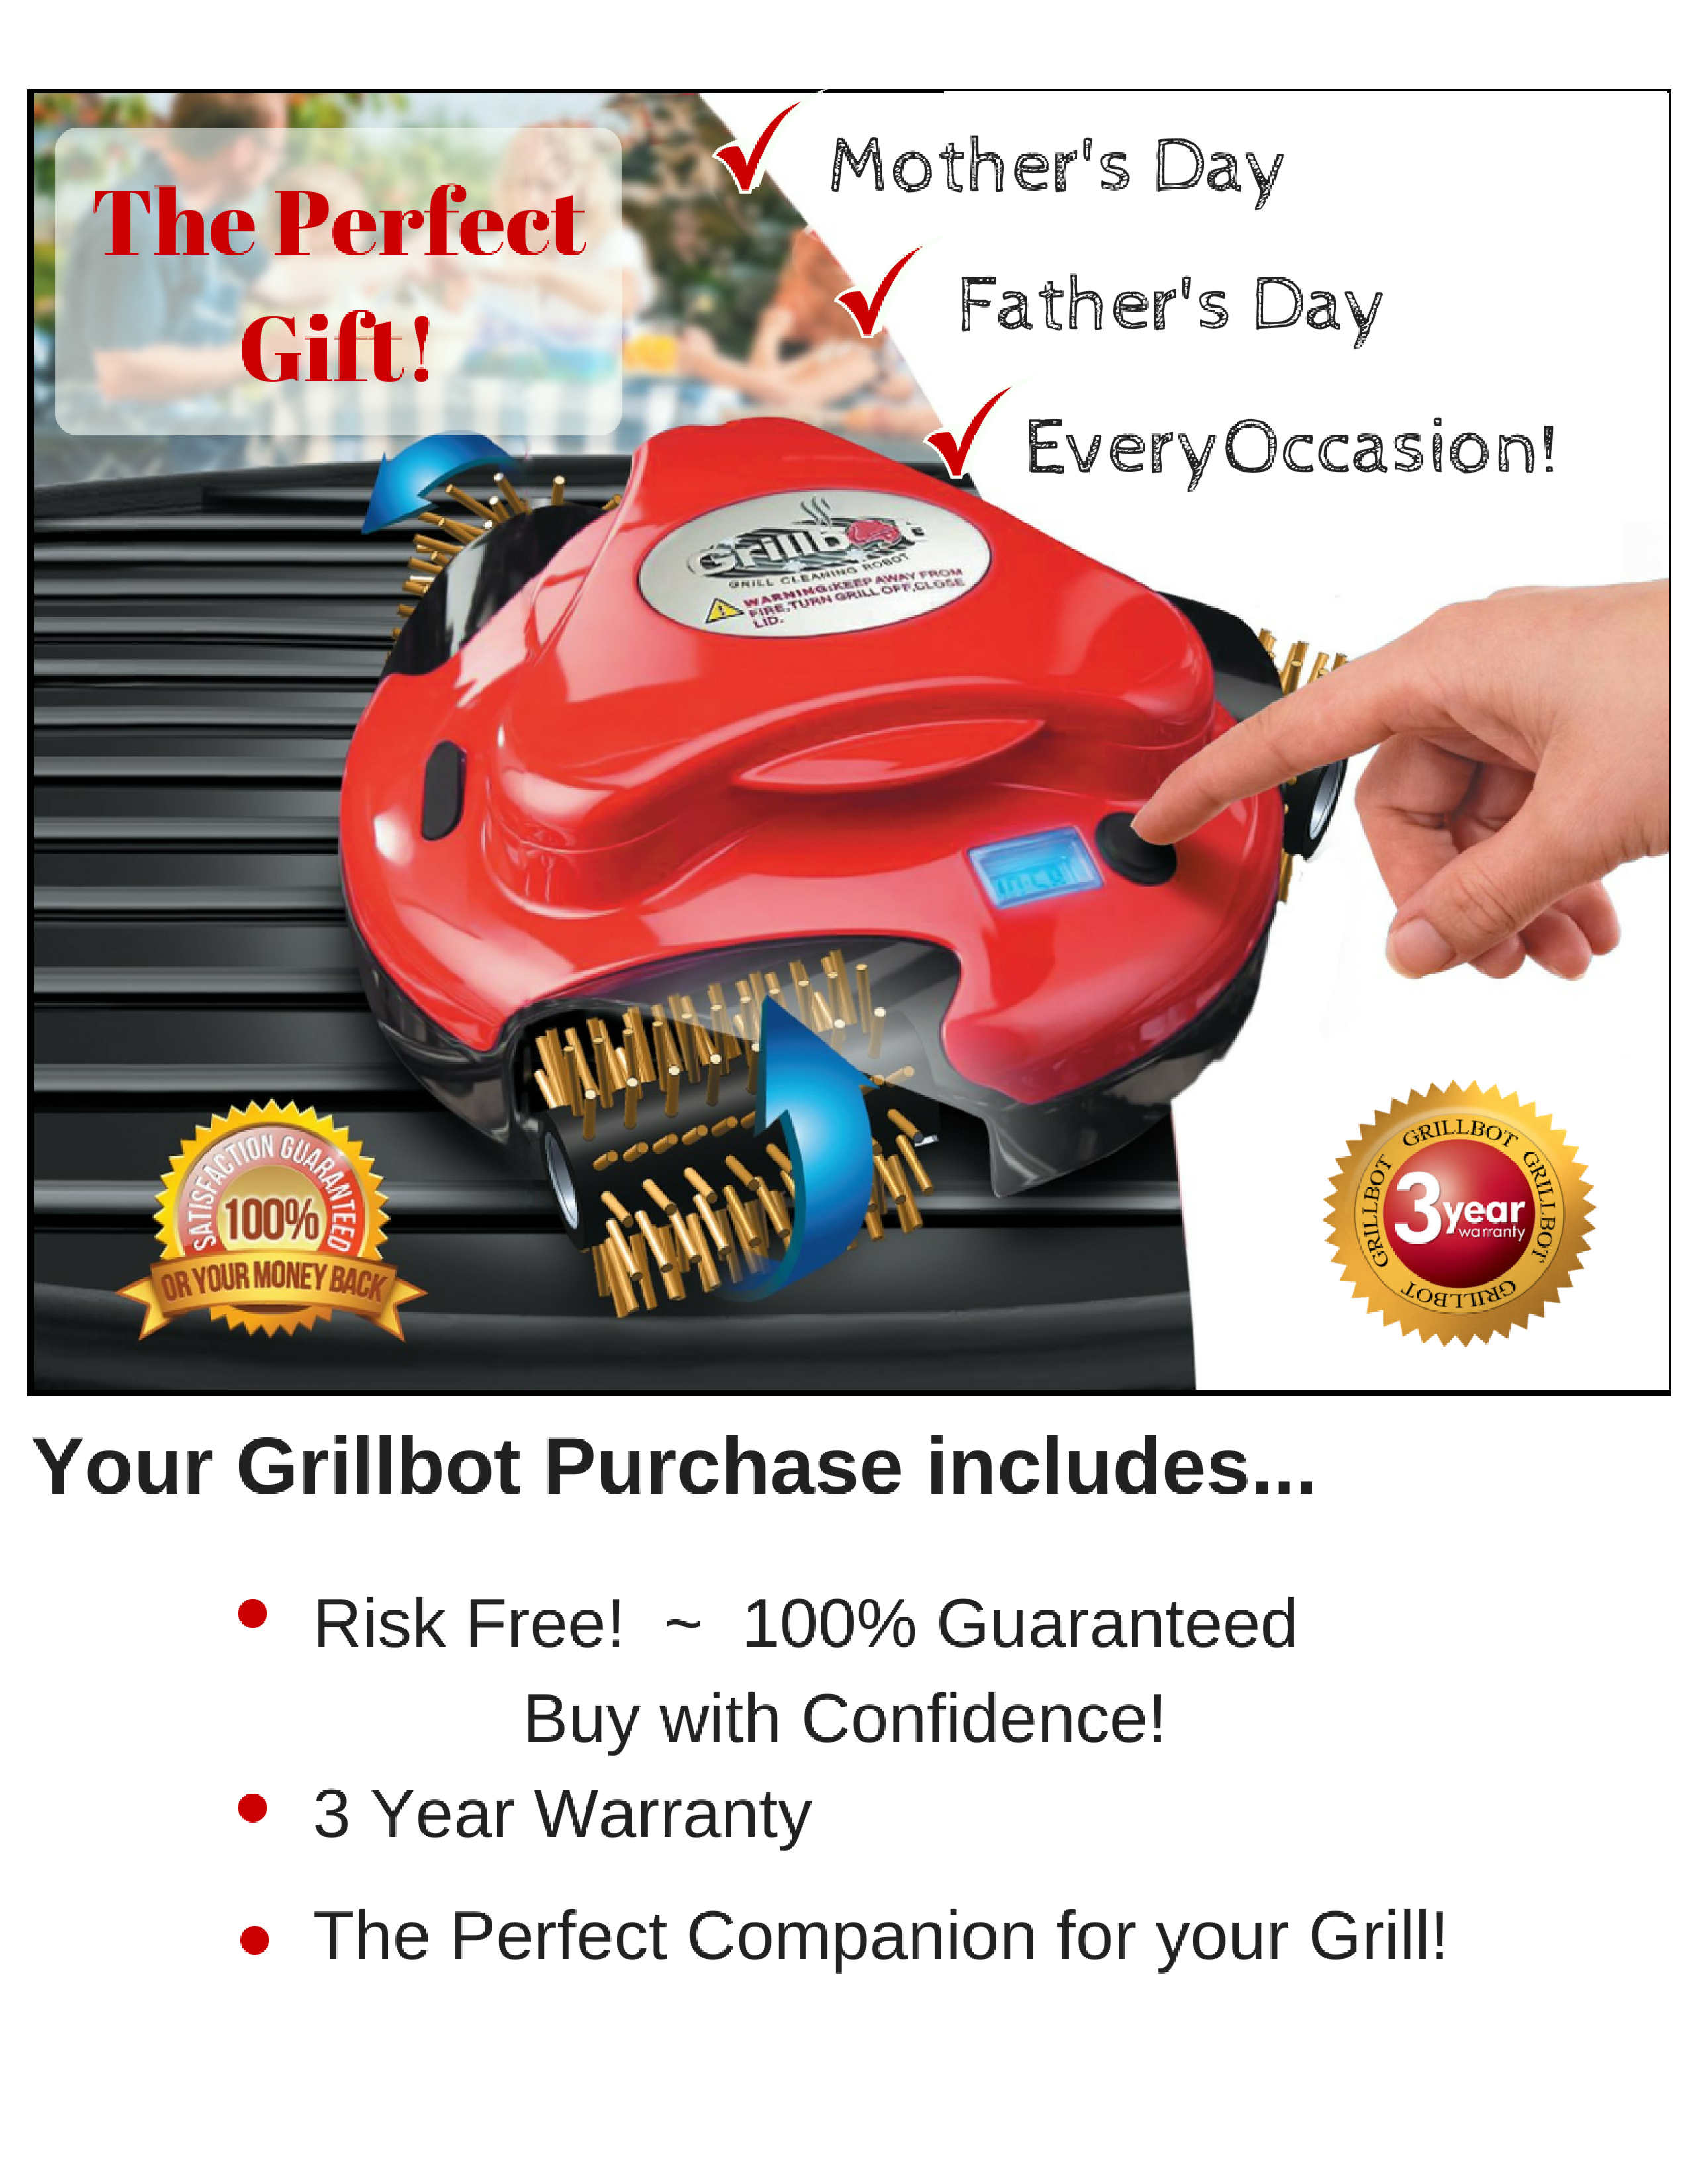 New-Age Momma Agrees! Grillbot Makes the perfect Mother's Day, Father's Day, or any other Holiday Gift! 